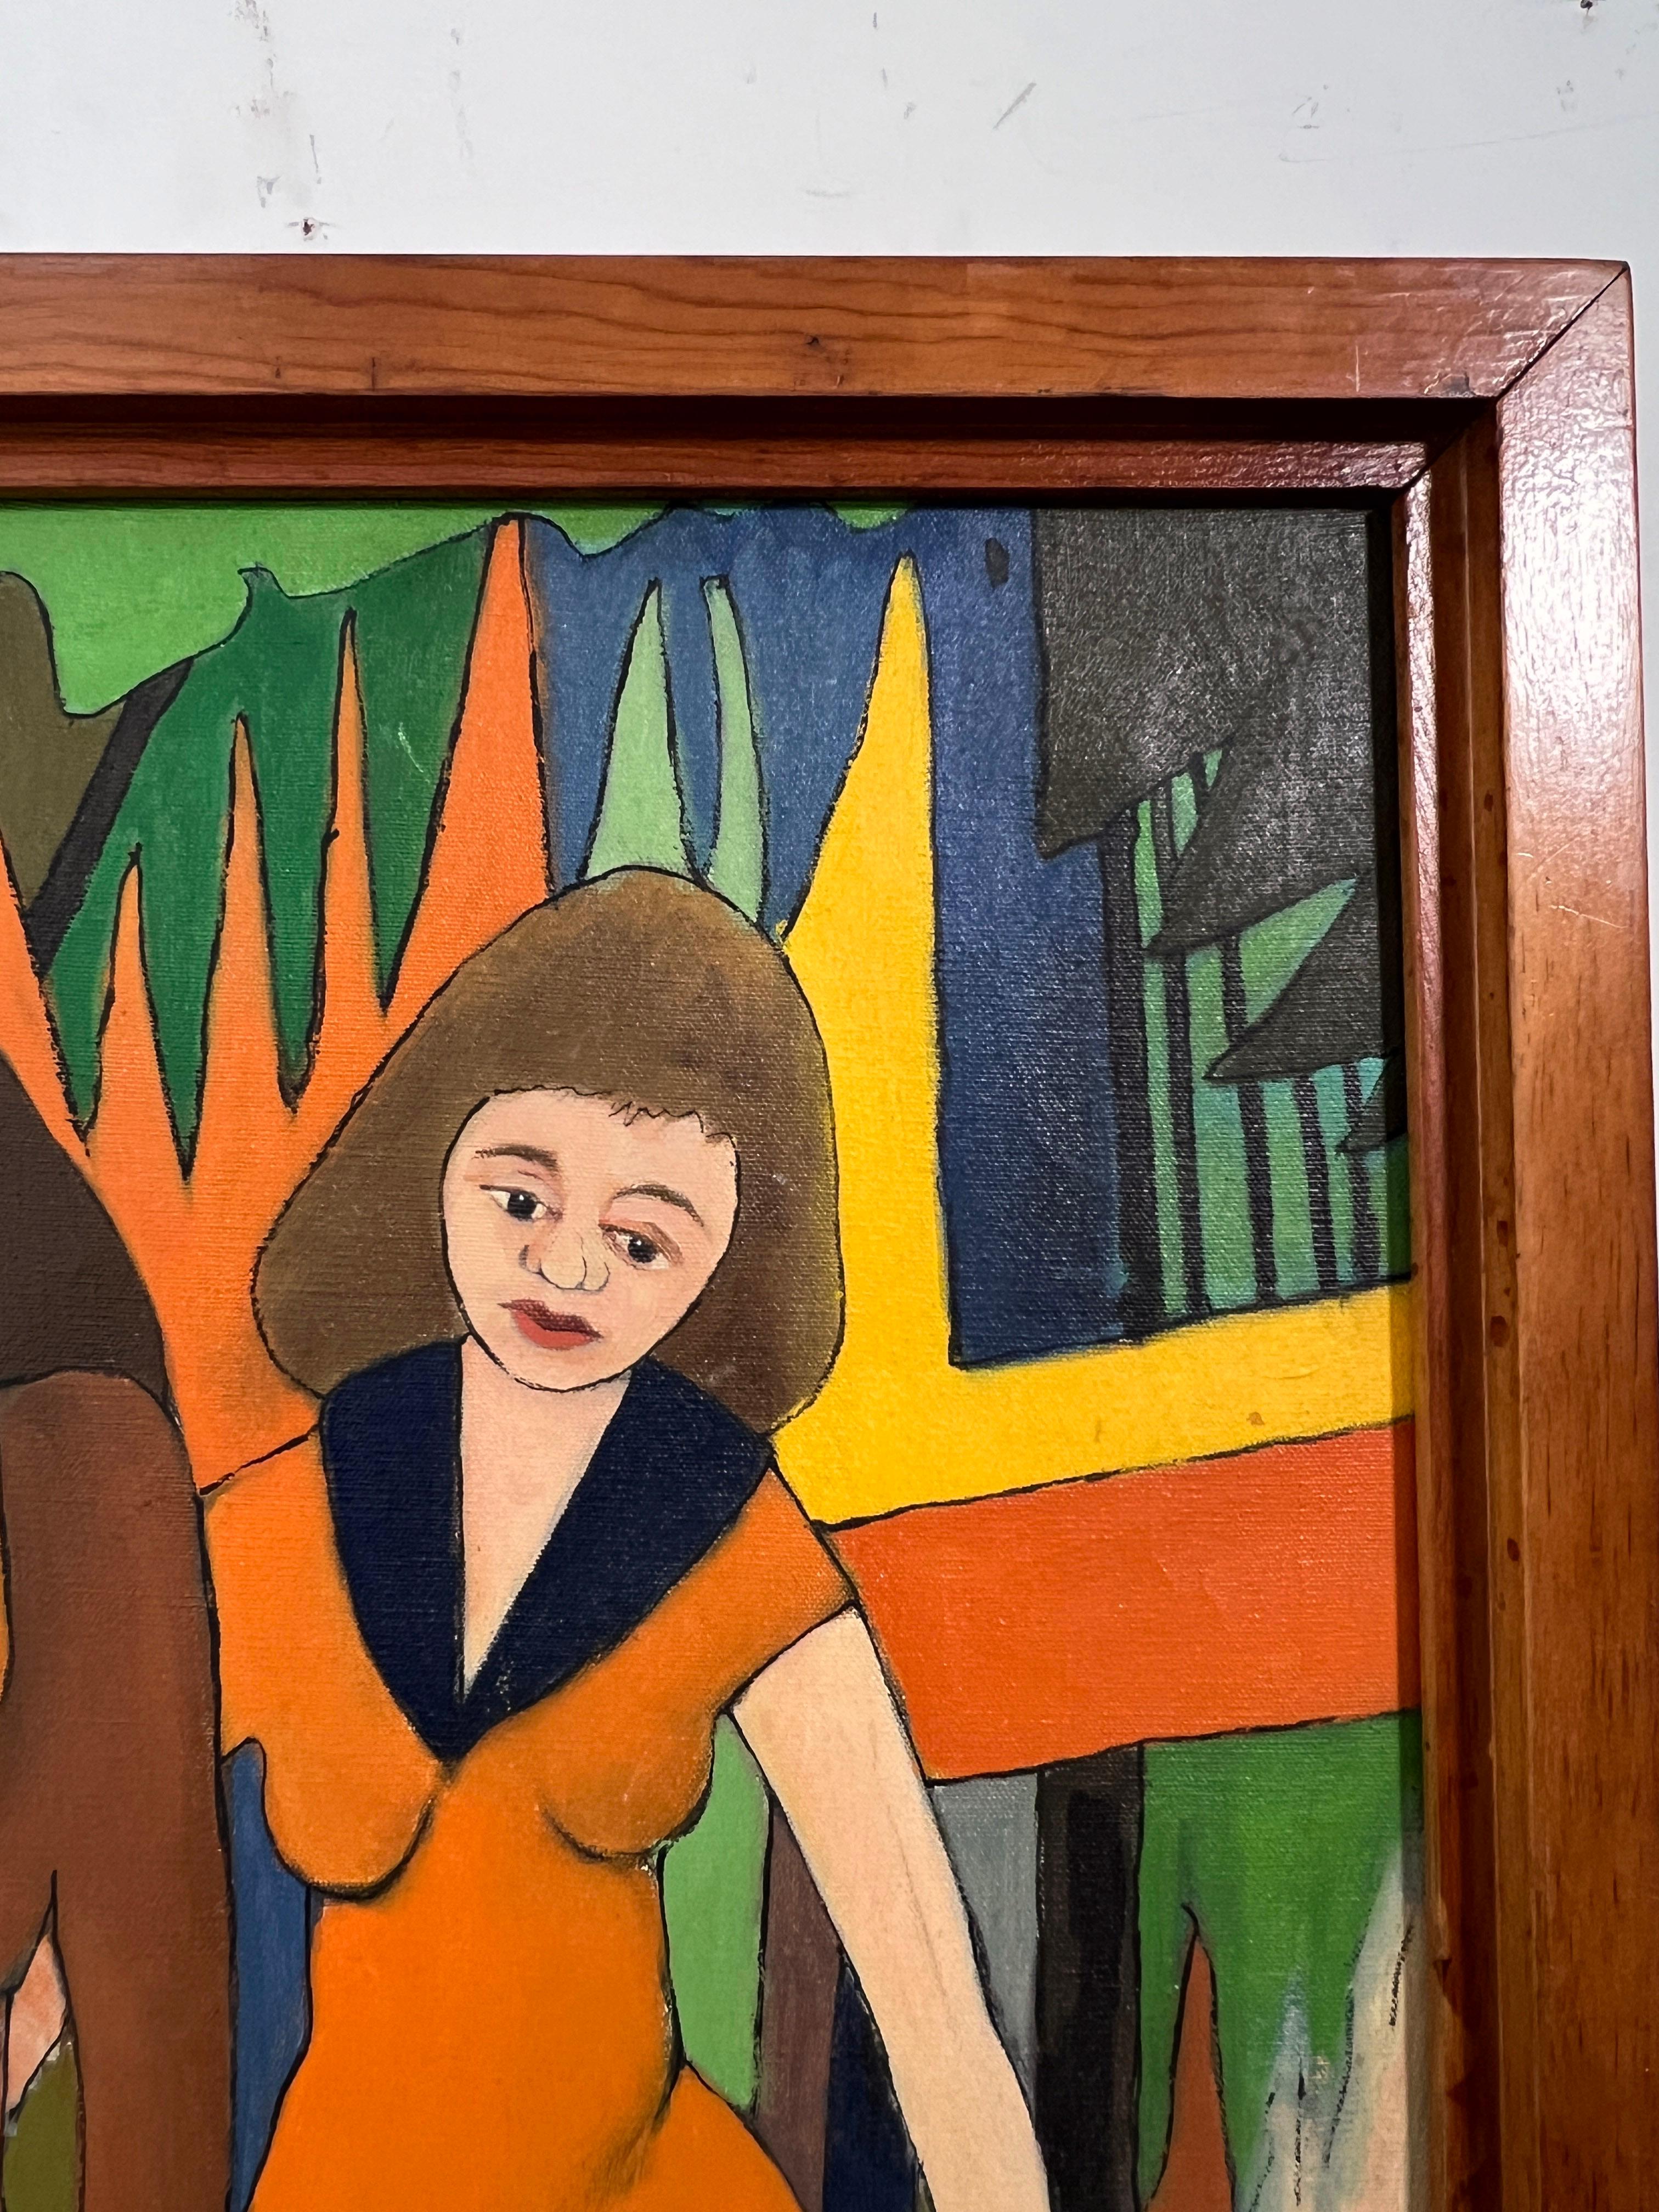 Outsider Folk Art Modernist Painting Dated 1959 by Peter Paul Sakowski In Good Condition For Sale In Peabody, MA